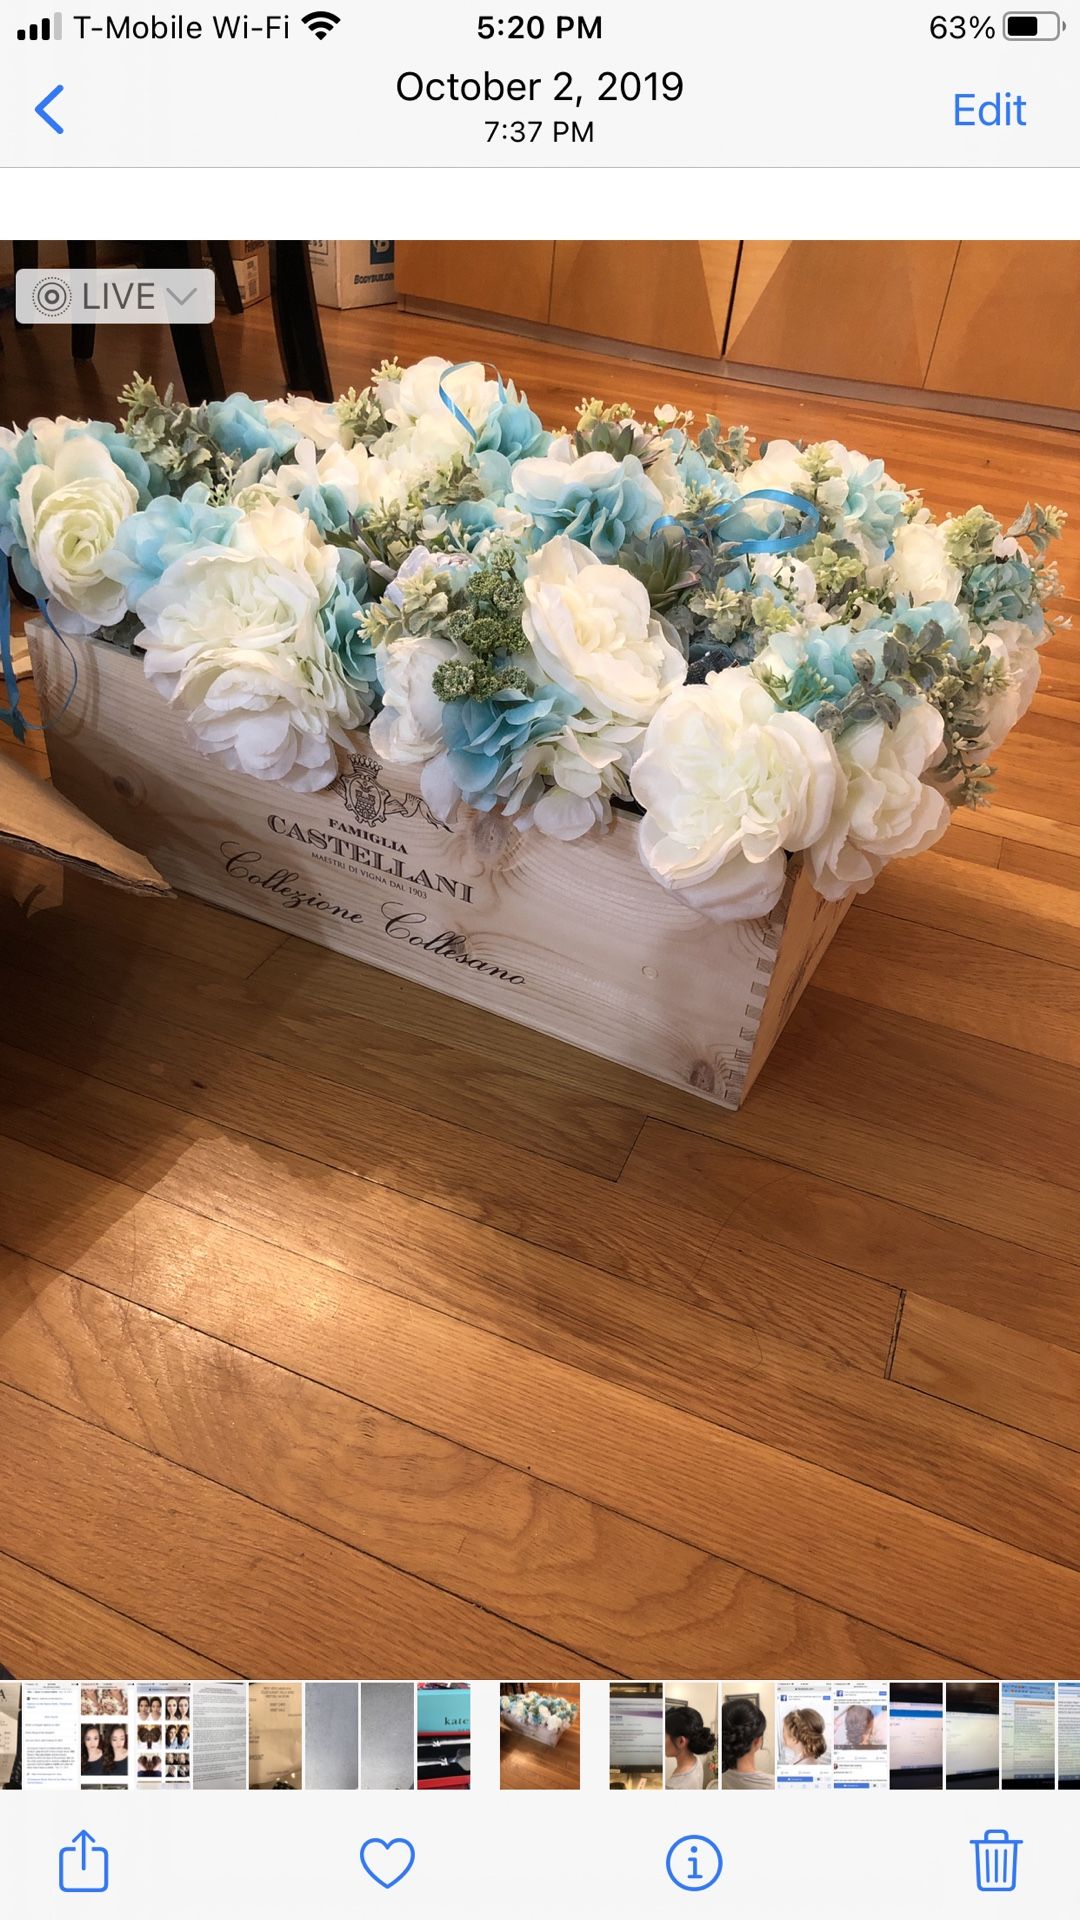 Floral Decorations Perfect For Wedding Centerpieces/pews